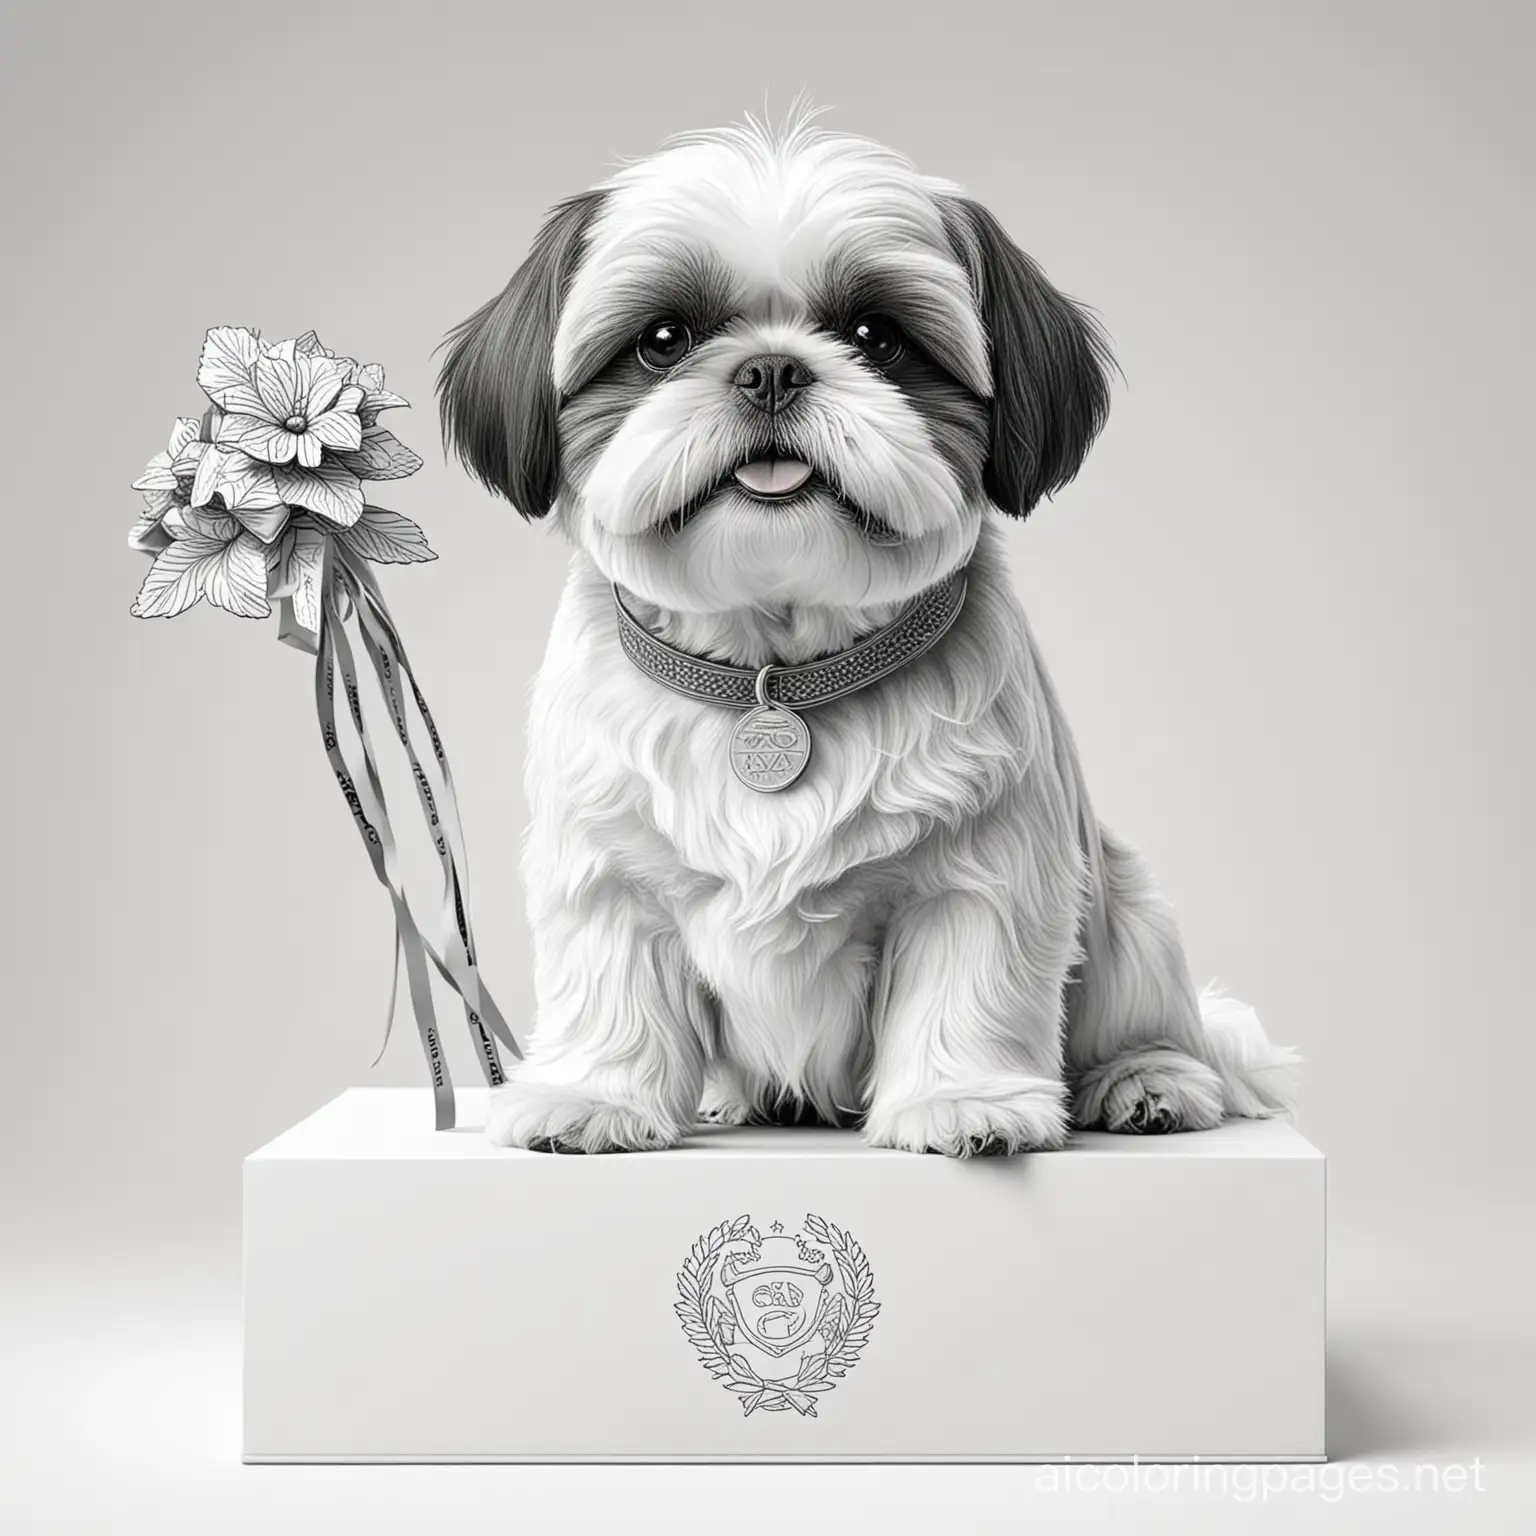 a Shih Tzu olympic champion on podium
, Coloring Page, black and white, line art, white background, Simplicity, Ample White Space. The background of the coloring page is plain white to make it easy for young children to color within the lines. The outlines of all the subjects are easy to distinguish, making it simple for kids to color without too much difficulty